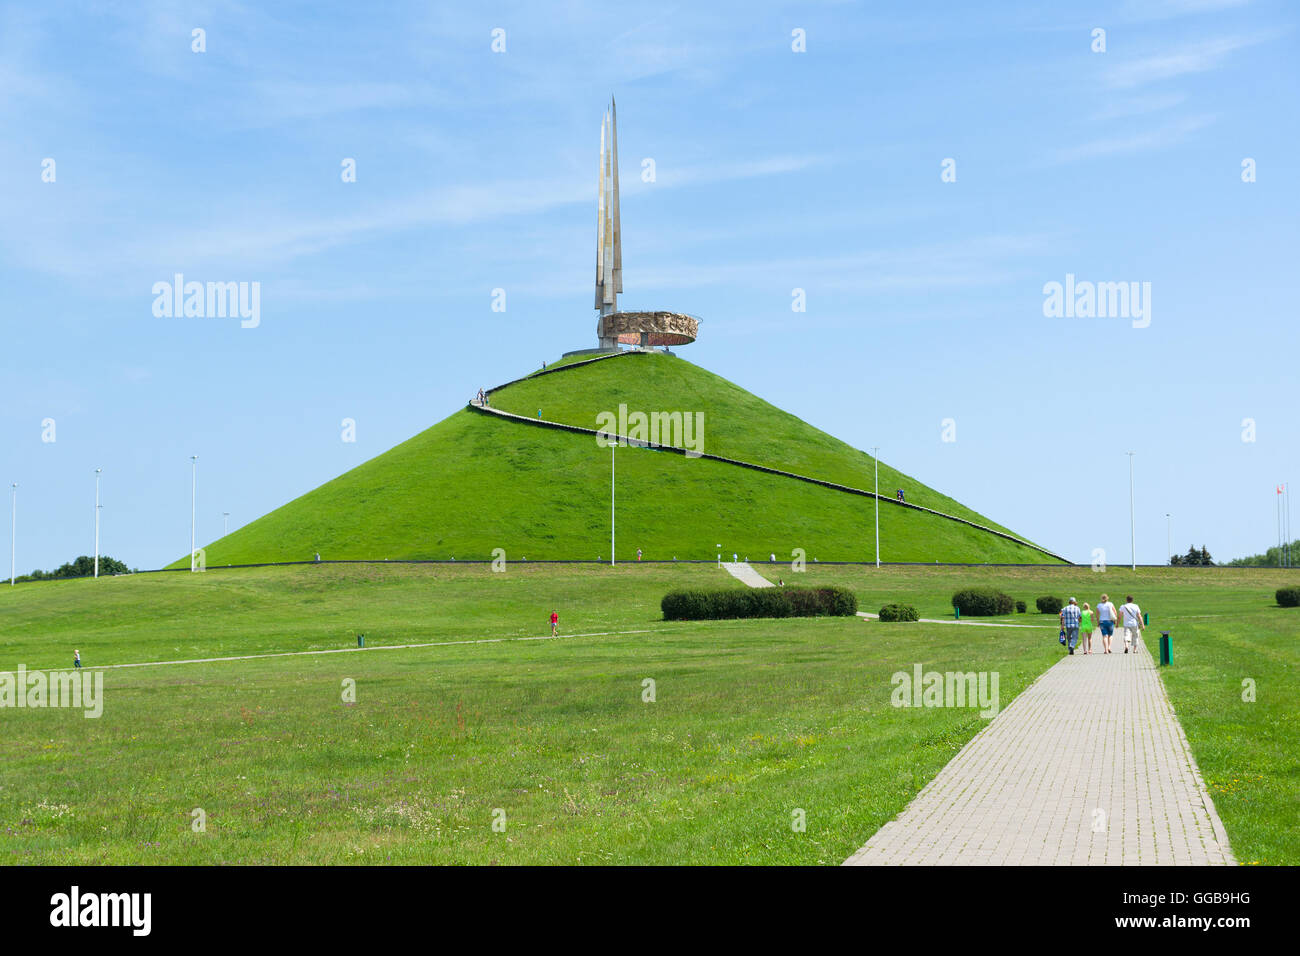 Minsk, Belarus - July 17, 2016: memorial complex 'Hill of Glory' is a monument to the Great Patriotic War in Belarus. Stock Photo